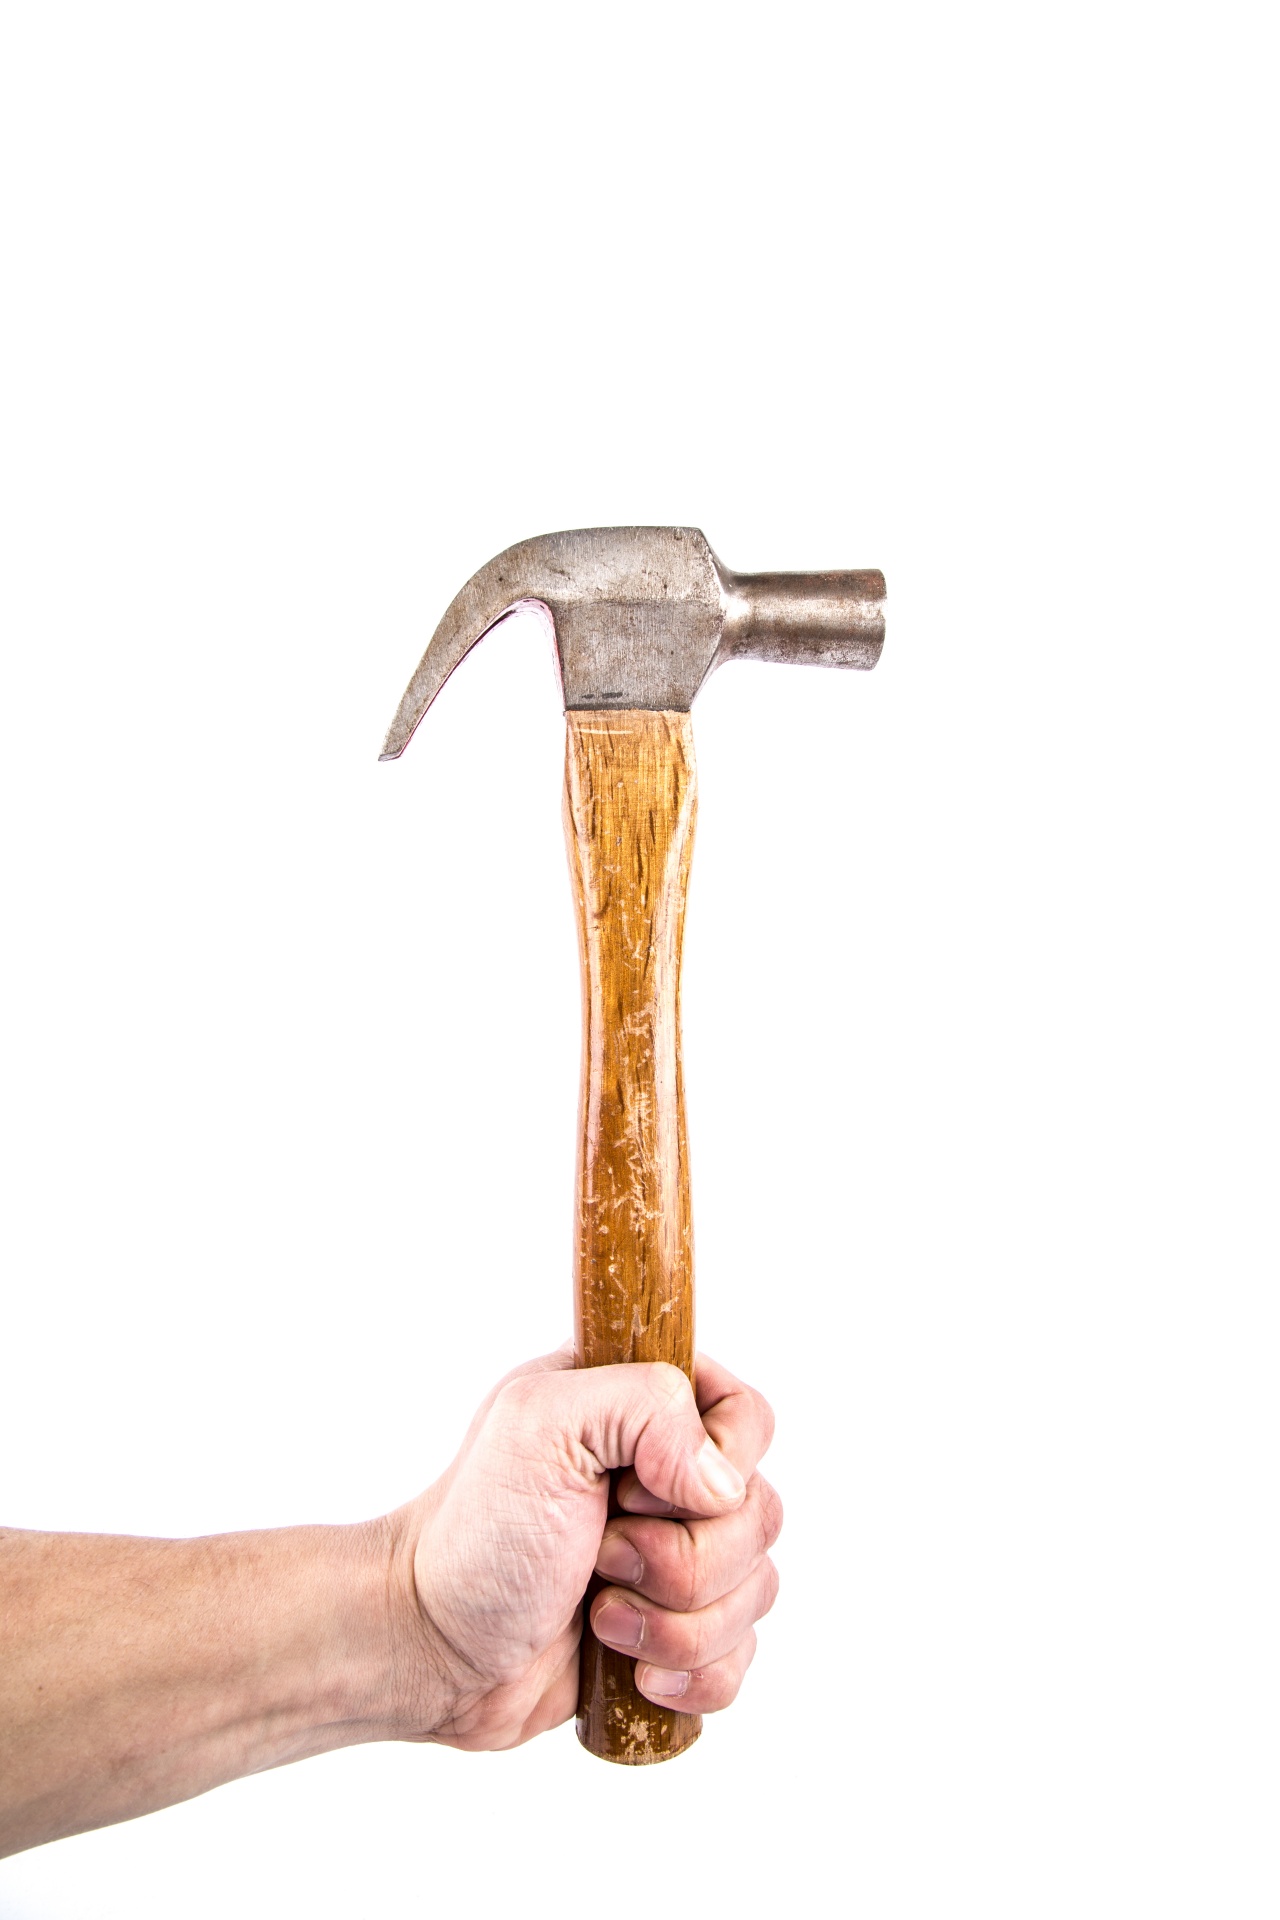 Hammer Free Stock Photo - Public Domain Pictures